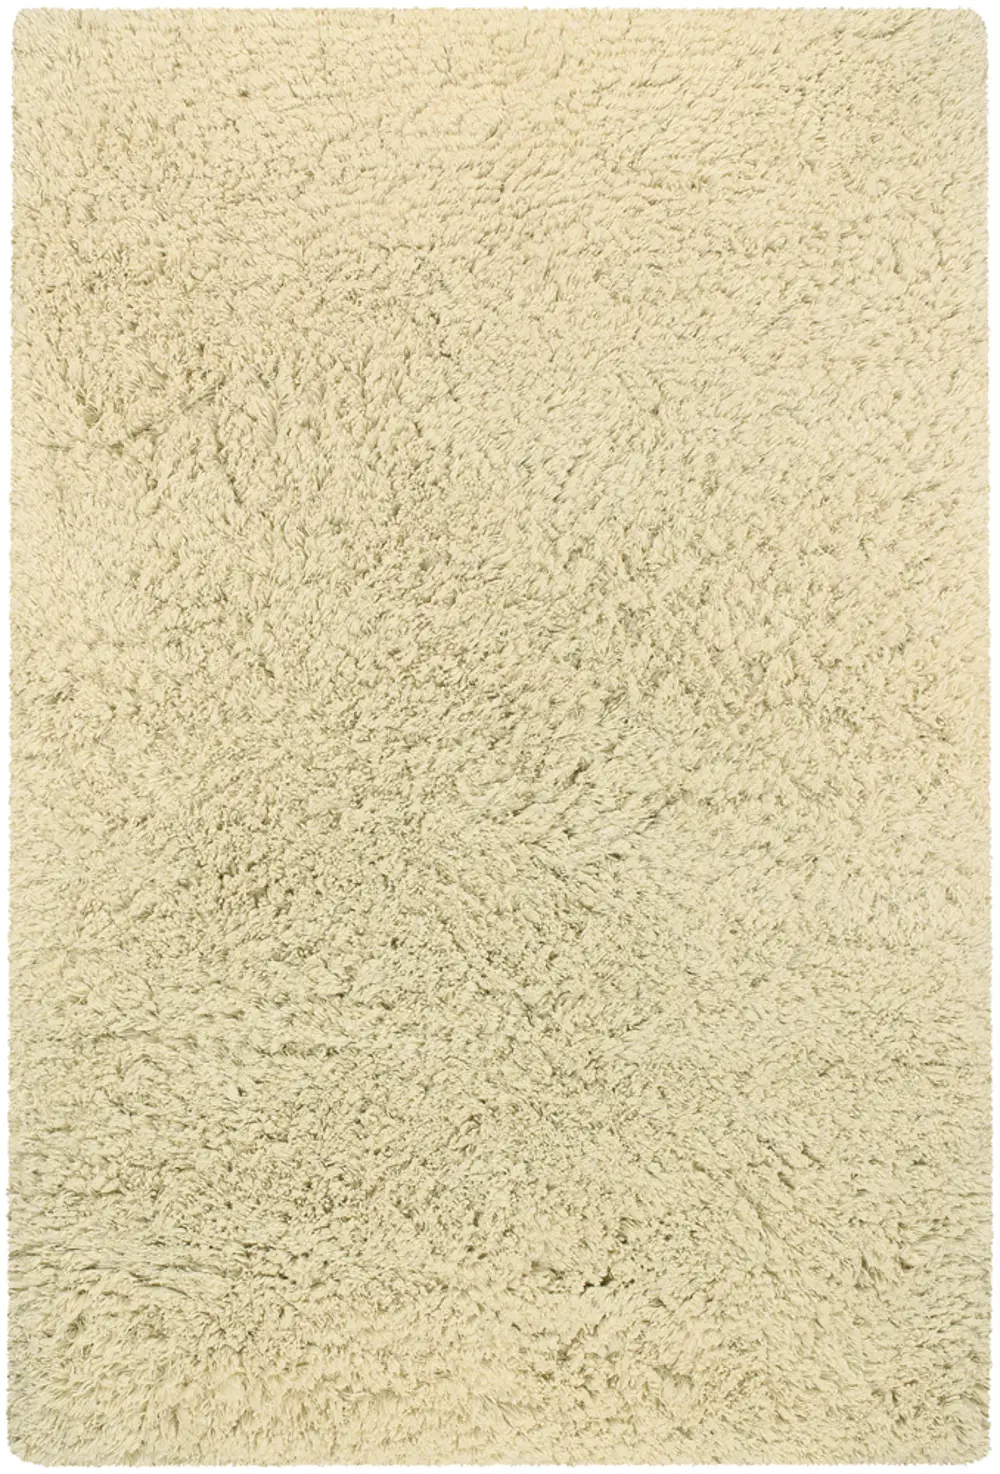 8 x 11 Large Contemporary Ivory Rug - Ambiance-1